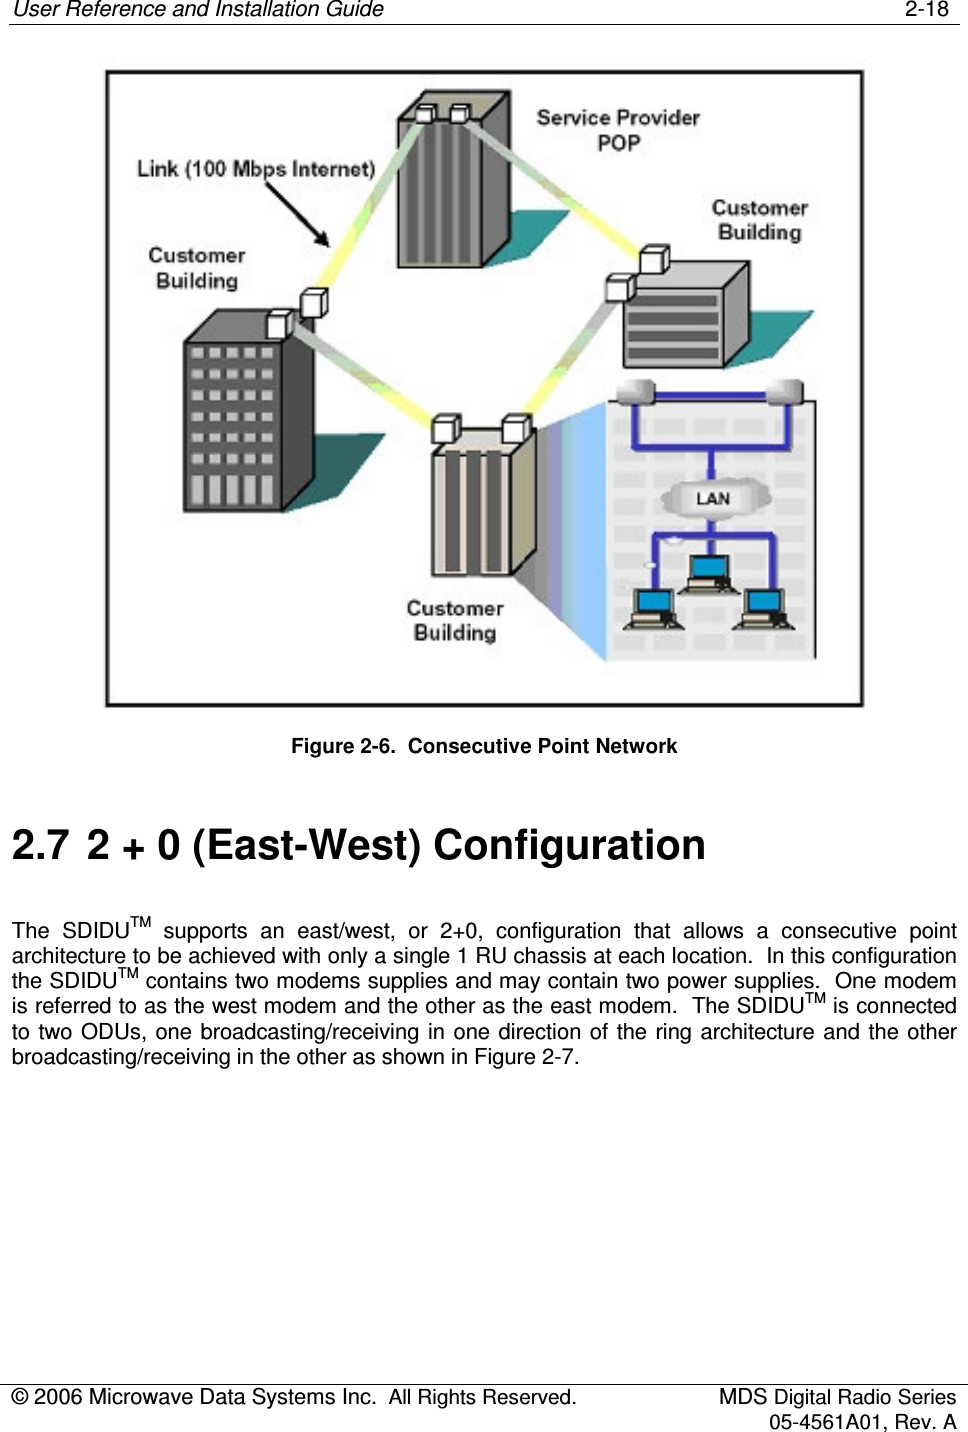 User Reference and Installation Guide    2-18 © 2006 Microwave Data Systems Inc.  All Rights Reserved.  MDS Digital Radio Series 05-4561A01, Rev. A   Figure 2-6.  Consecutive Point Network 2.7  2 + 0 (East-West) Configuration  The  SDIDUTM  supports  an  east/west,  or  2+0,  configuration  that  allows  a  consecutive  point architecture to be achieved with only a single 1 RU chassis at each location.  In this configuration the SDIDUTM contains two modems supplies and may contain two power supplies.  One modem is referred to as the west modem and the other as the east modem.  The SDIDUTM is connected to two ODUs,  one broadcasting/receiving in one direction of the ring architecture and the other broadcasting/receiving in the other as shown in Figure 2-7. 